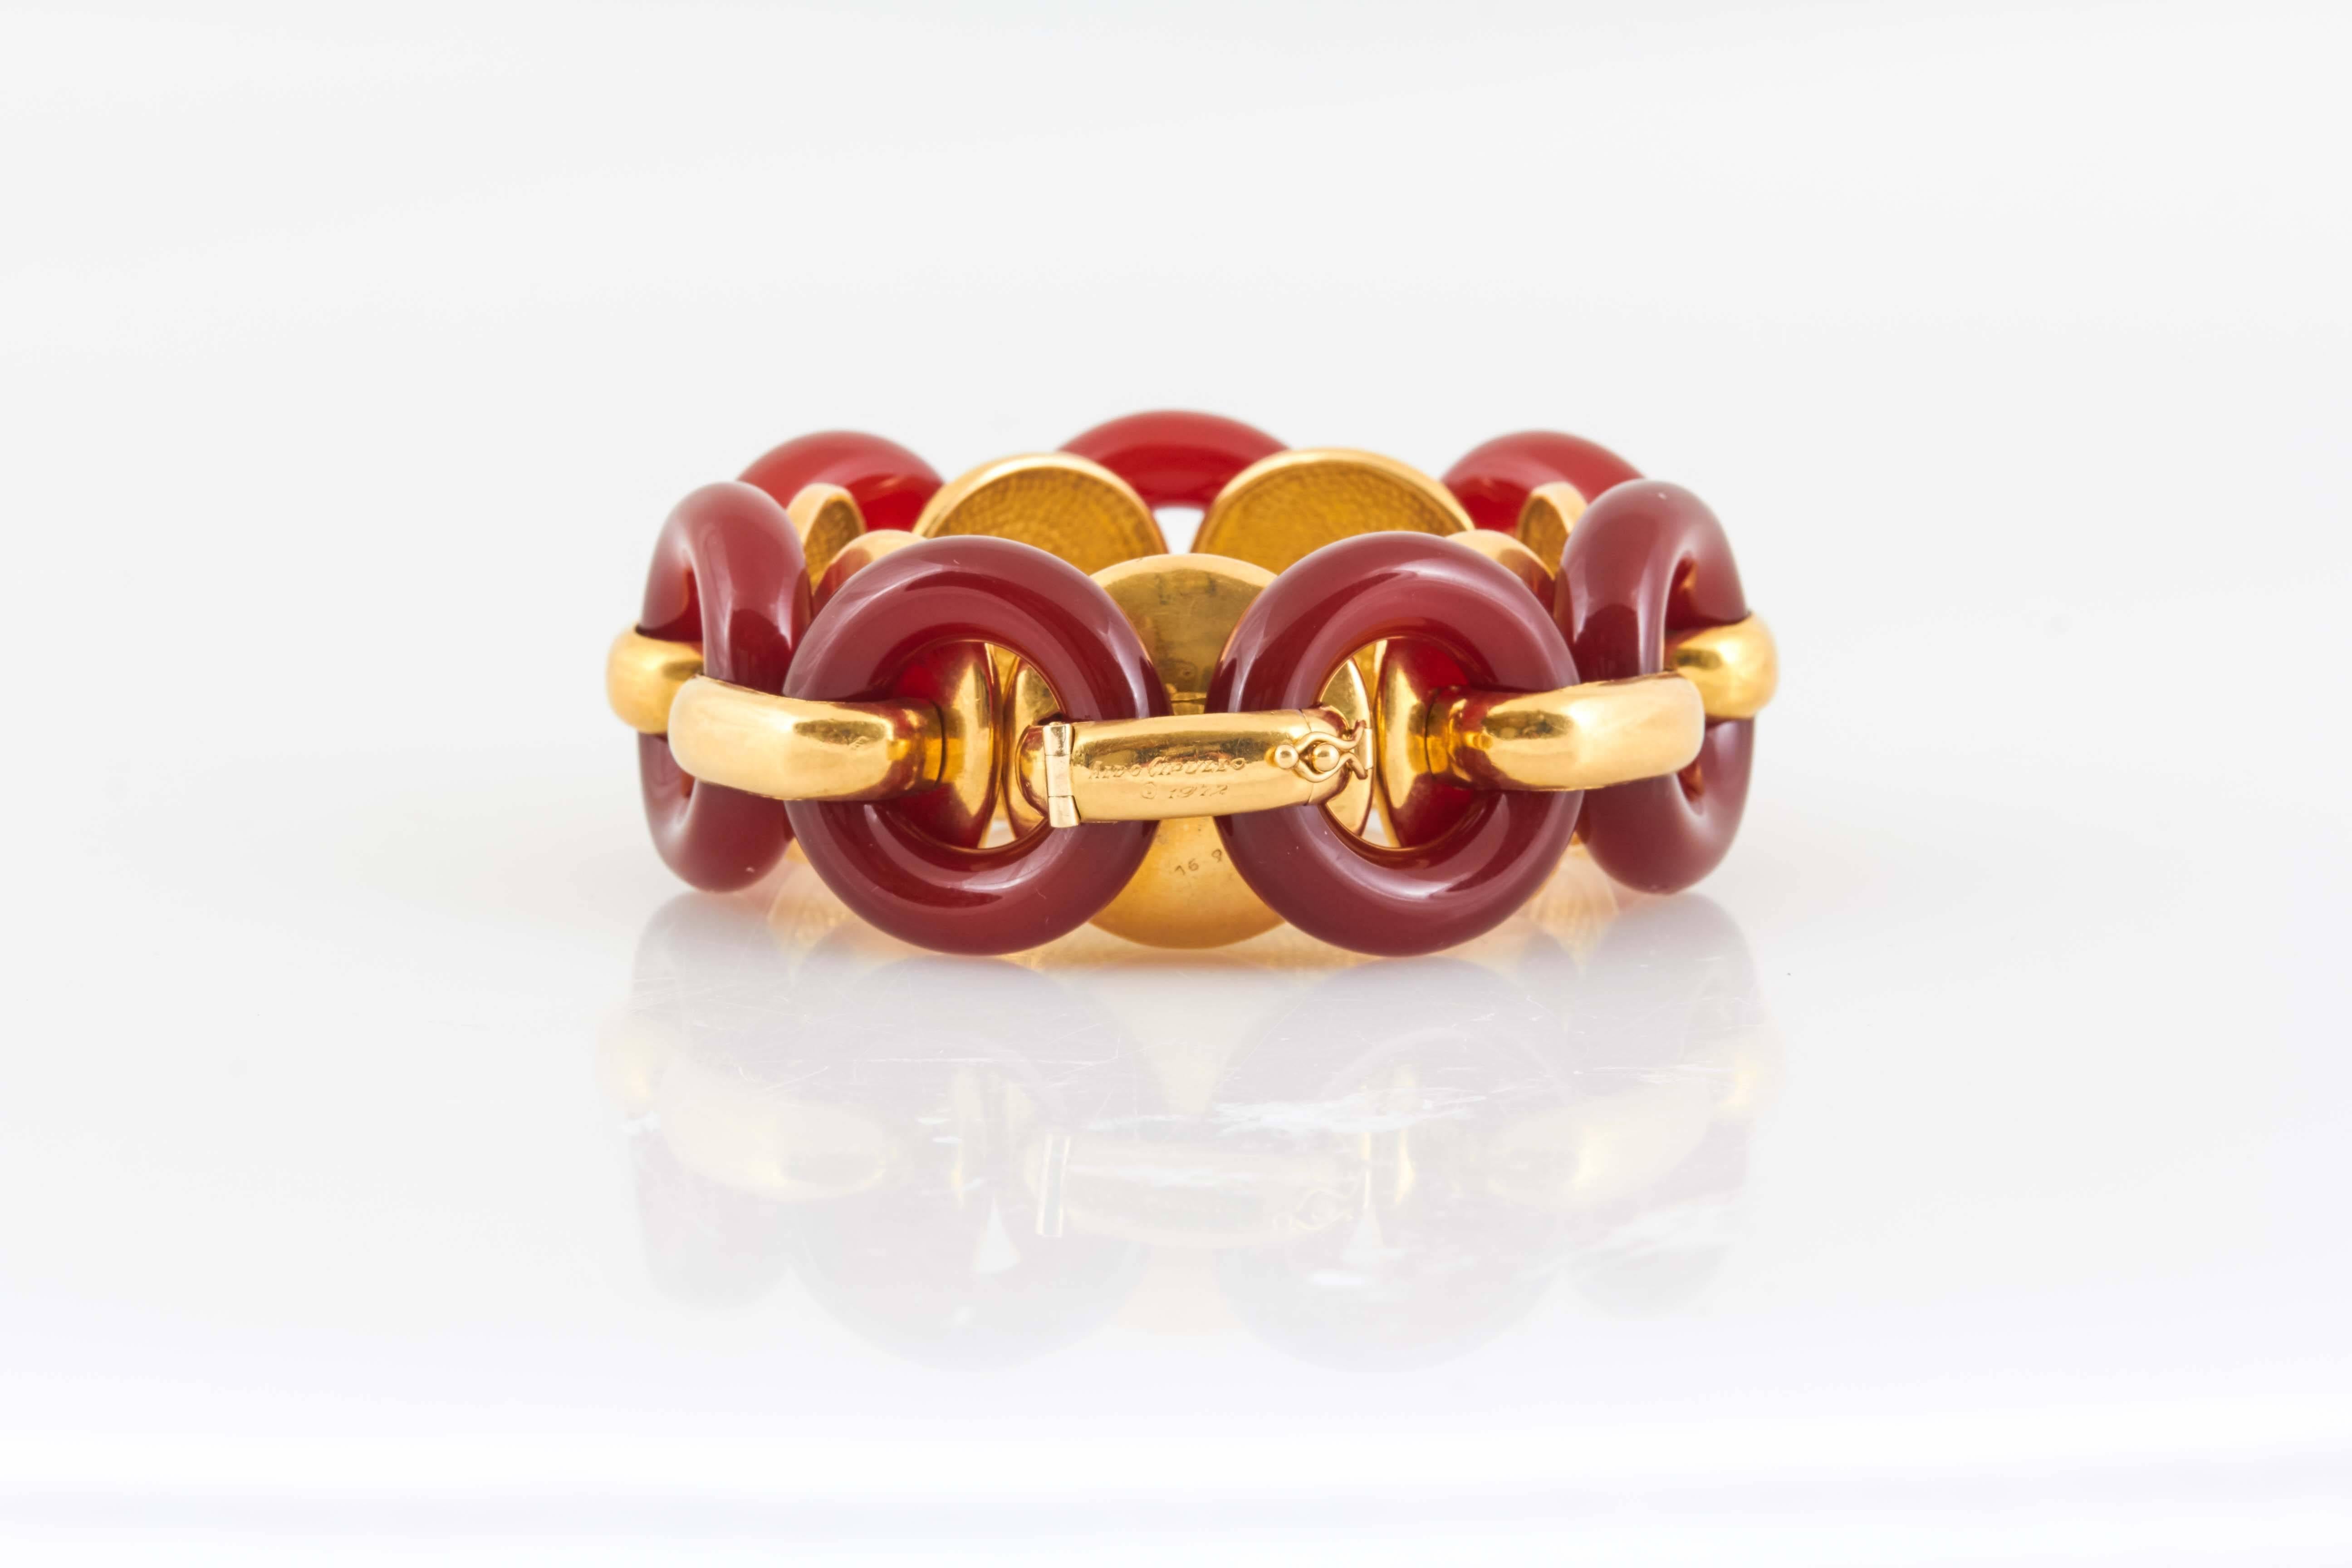 Carnelian Bracelet finely crafted in 18k yellow gold. Signed by Cartier. 